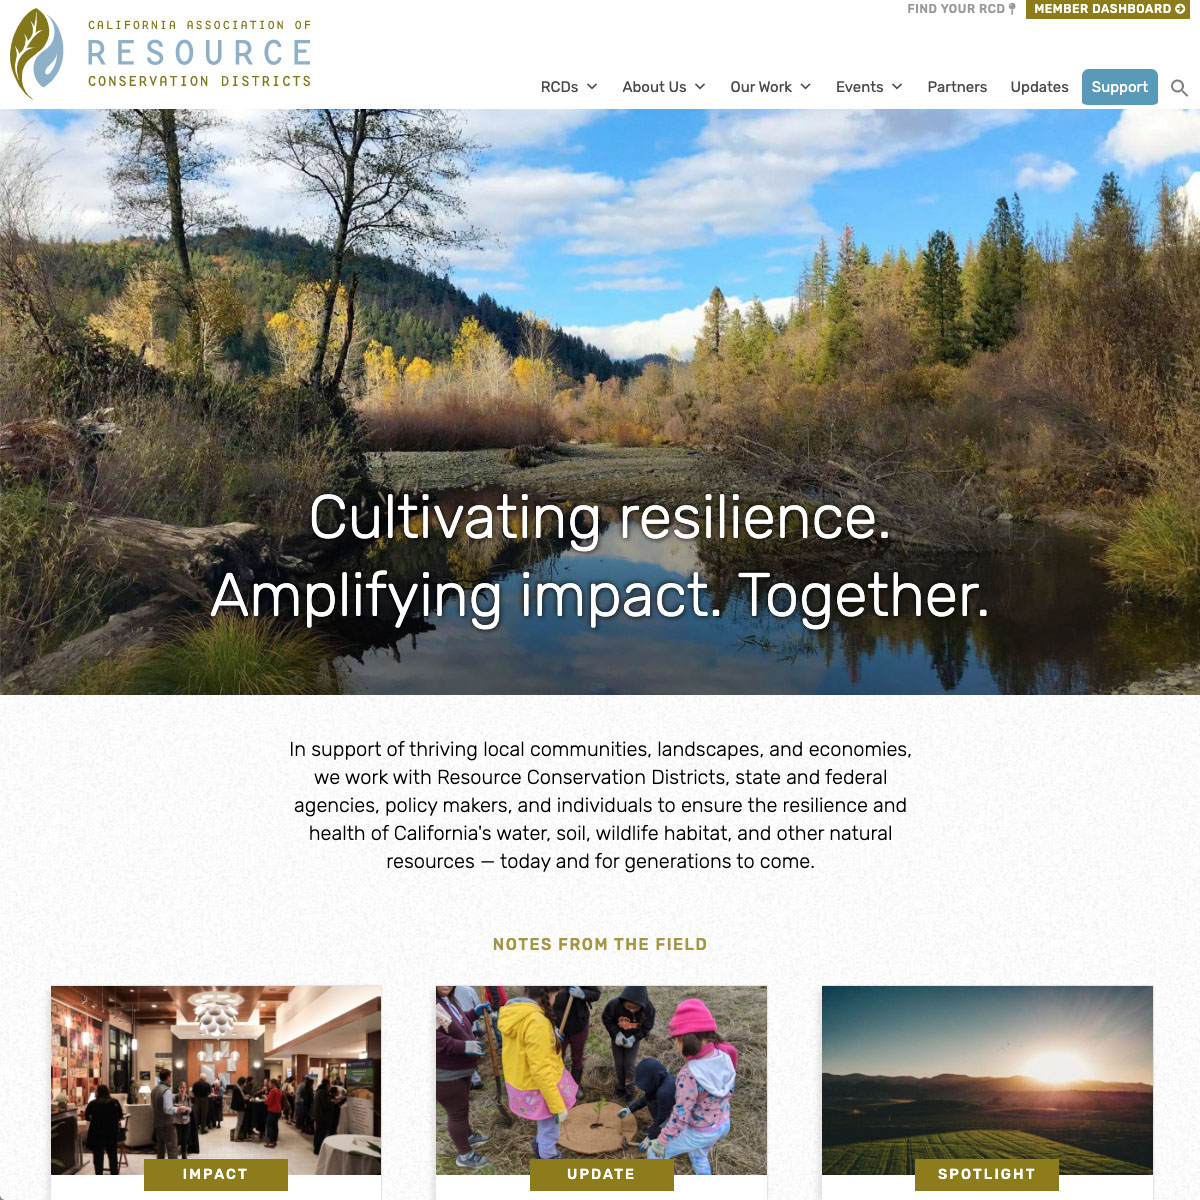 screenshot of the CARCD homepage showing a hero image of a landscape with a lake and forest, a mission statement, and blocks with recent updates